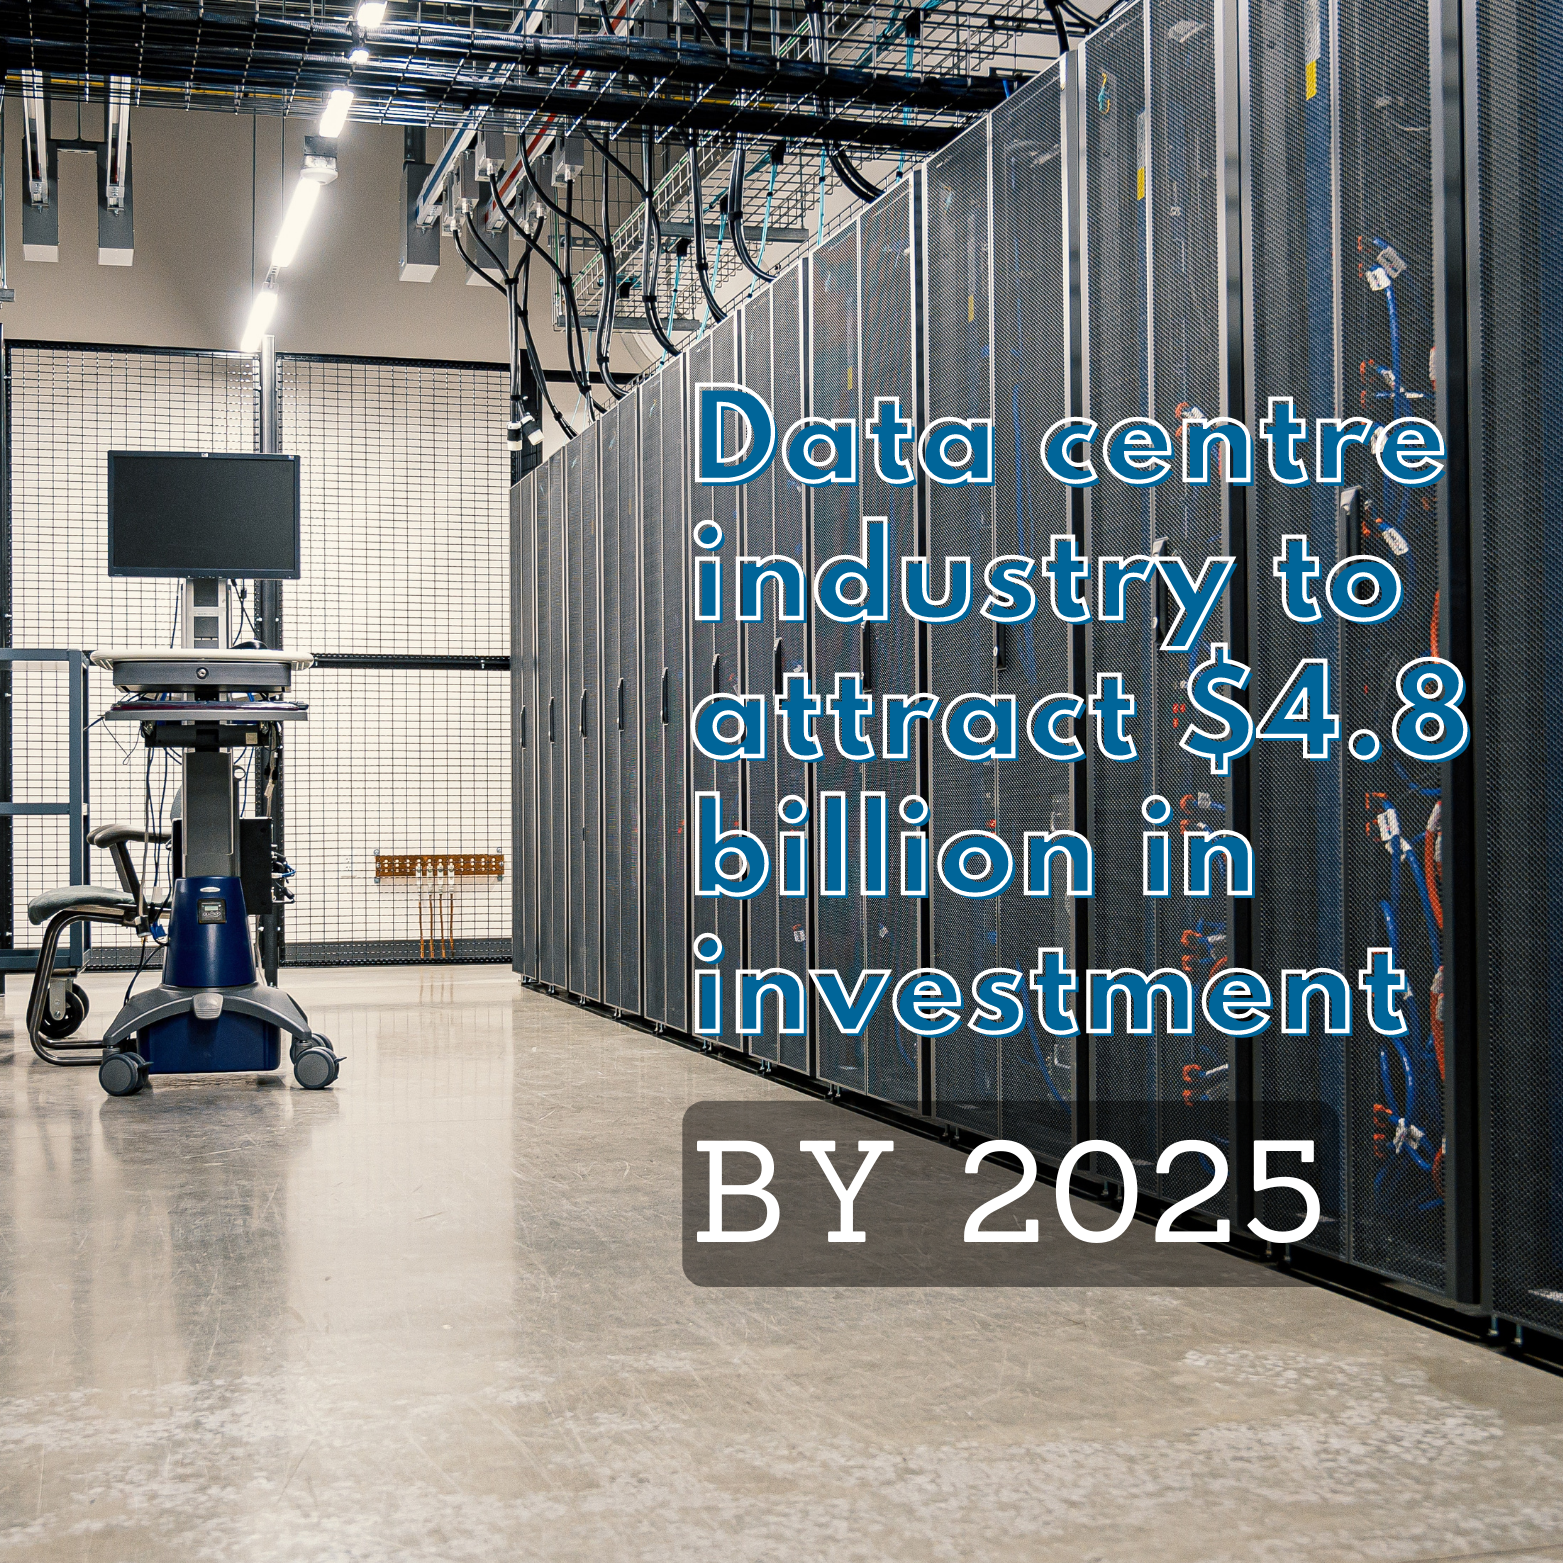 Data centre industry to attract $4.8 billion in investment by 2025